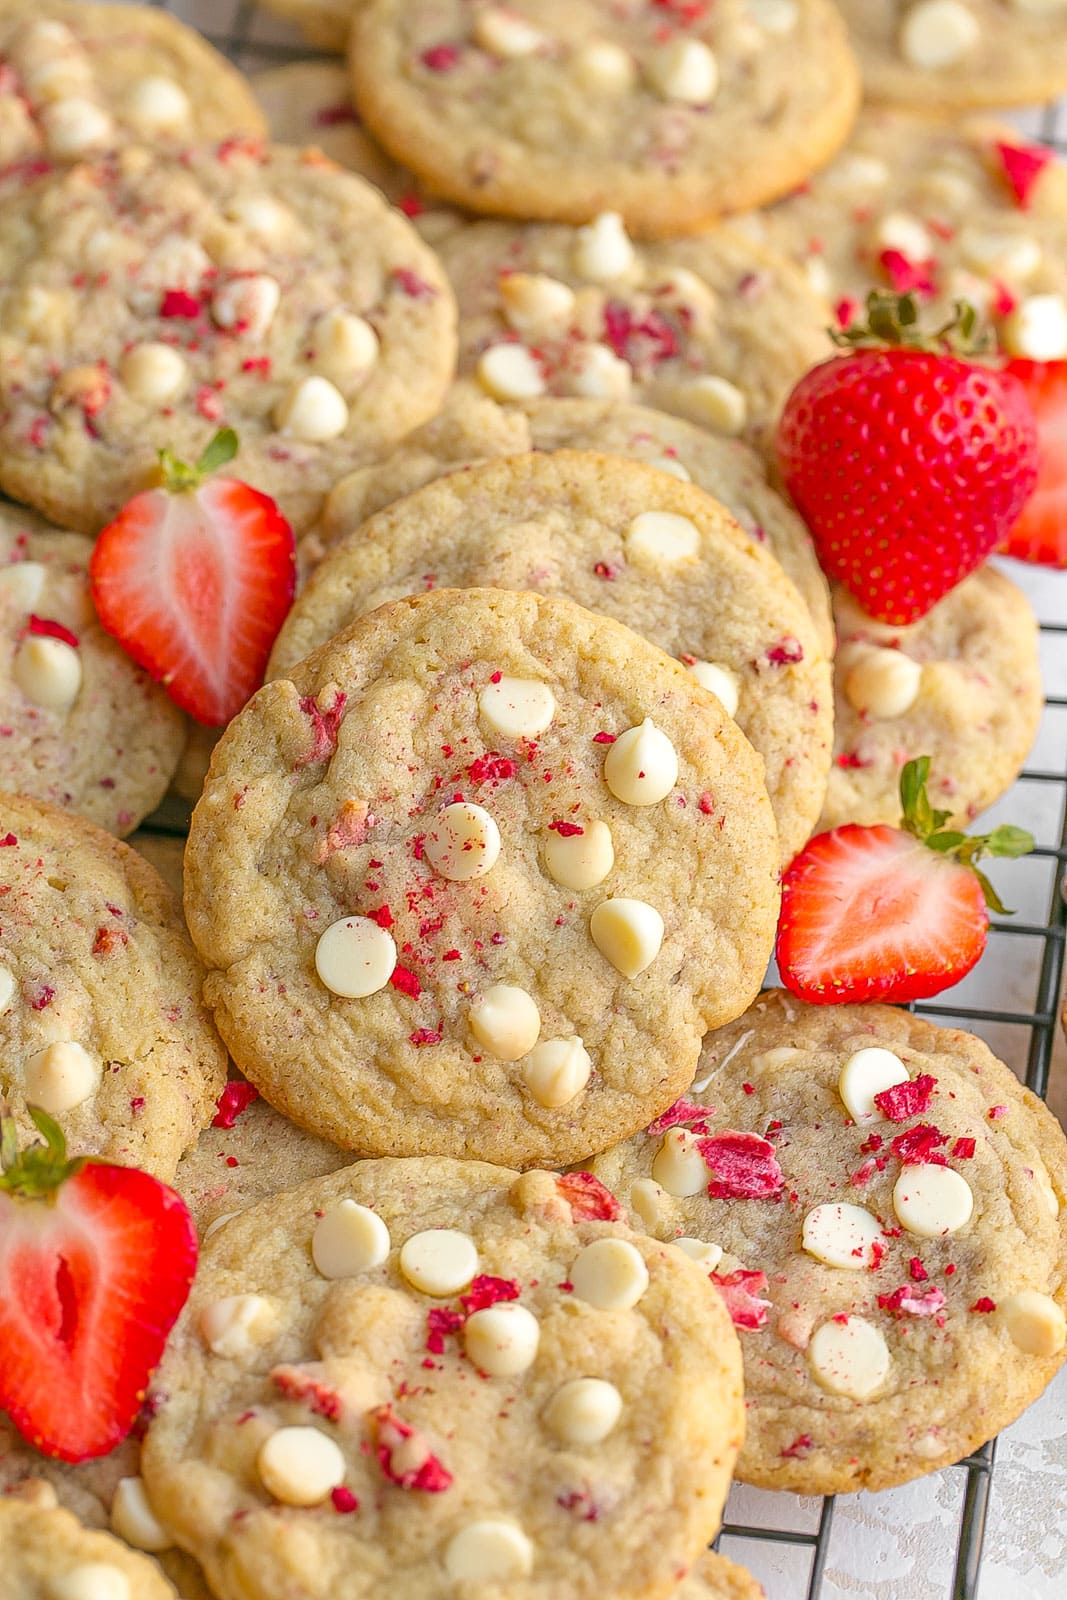 Cookies with strawberries and white chocolate chips.